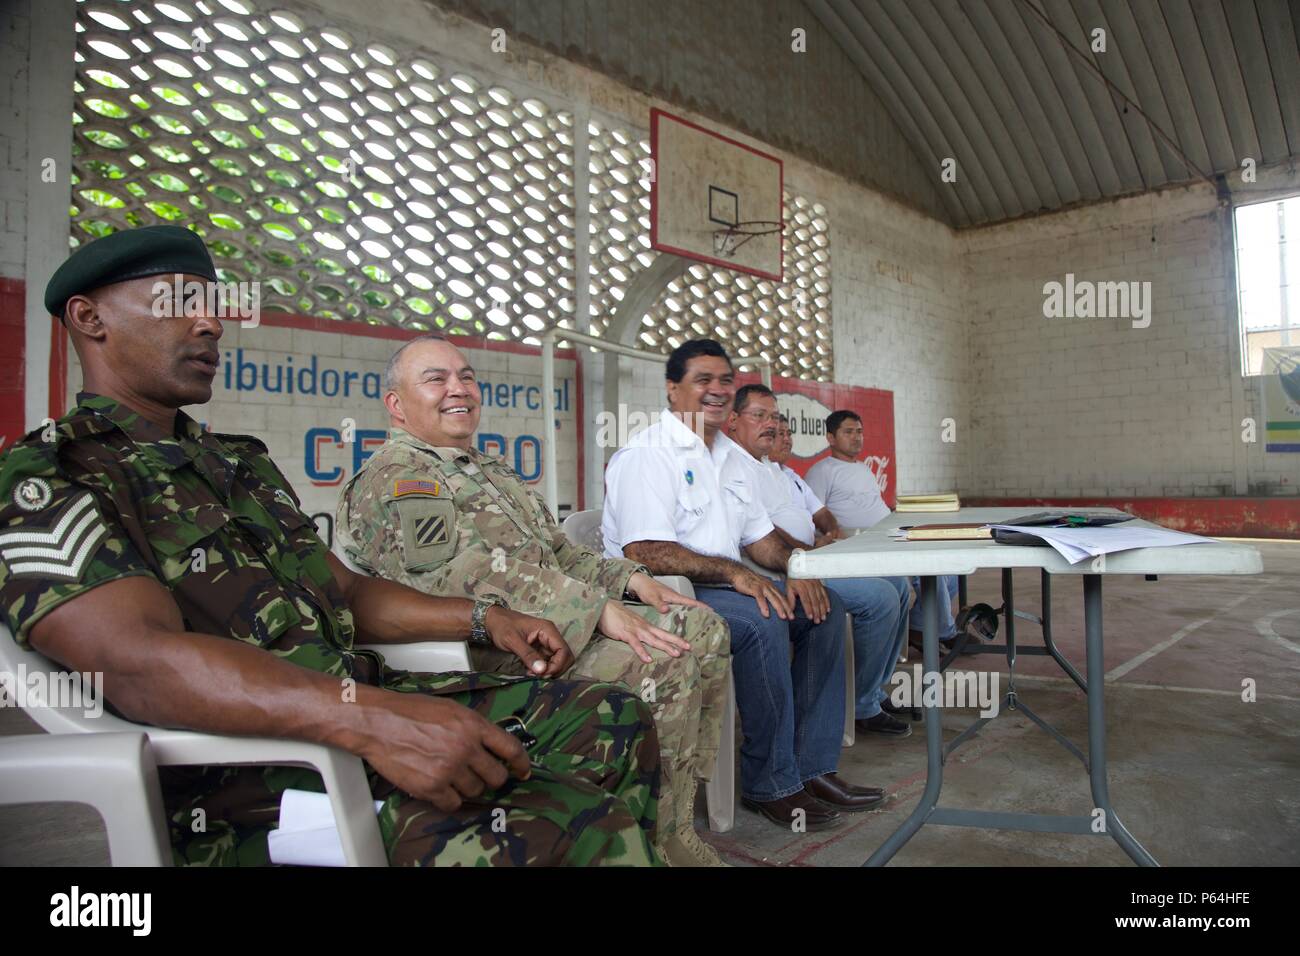 Joint Military members and Mayor Armufo Cordeno speak to the local Cocodes about the future Medical Treatment Exercise as part of The Beyond The Horizon Operation at La Blanca, Guatemala, May 04, 2016. Task Force Red Wolf and Army South conducts Humanitarian Civil Assistance Training to include tactical level construction projects and Medical Readiness Training Exercises providing medical access and building schools in Guatemala with the Guatemalan Government and non-government agencies from 05MAR16 to 18JUN16 in order to improve the mission readiness of US forces and to provide a lasting bene Stock Photo